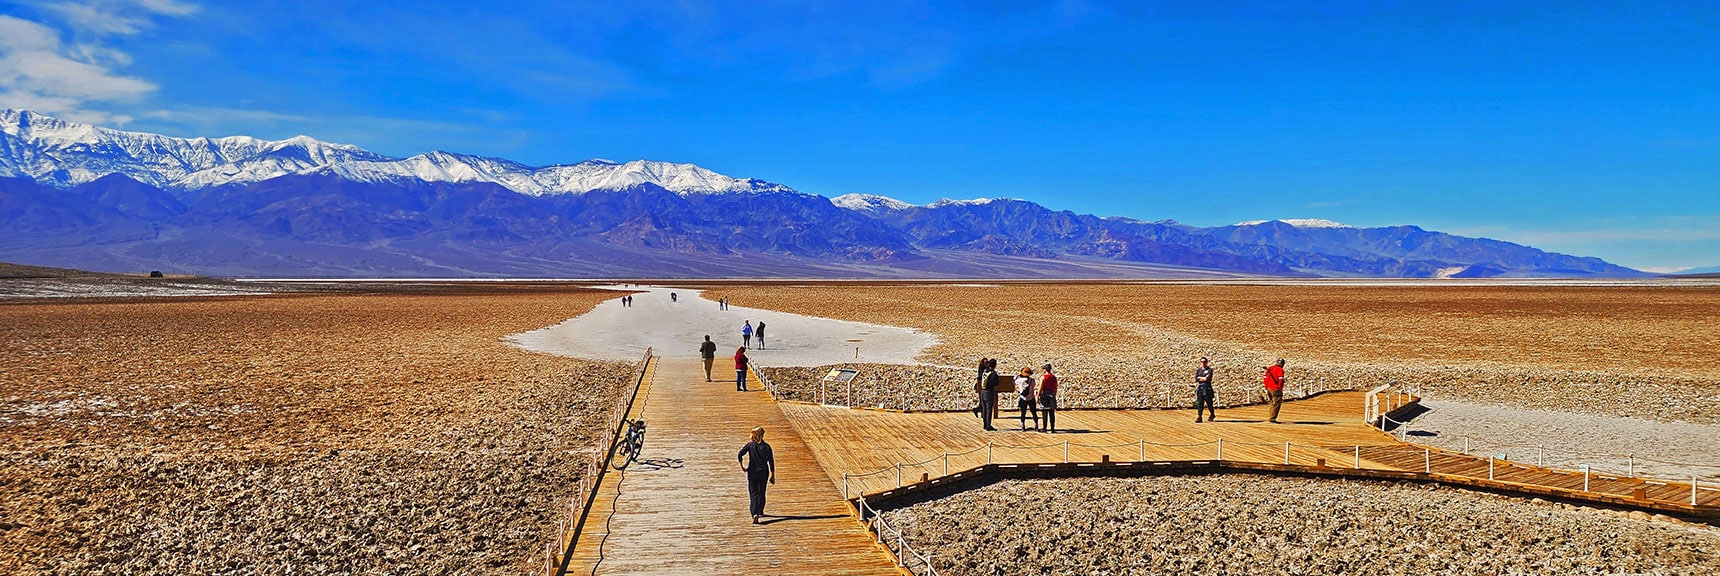 Continual Procession of Visitors at Badwater Curious About What's Further Out | Death Valley Crossing | Death Valley National Park, California | David Smith | LasVegasAreaTrails.com